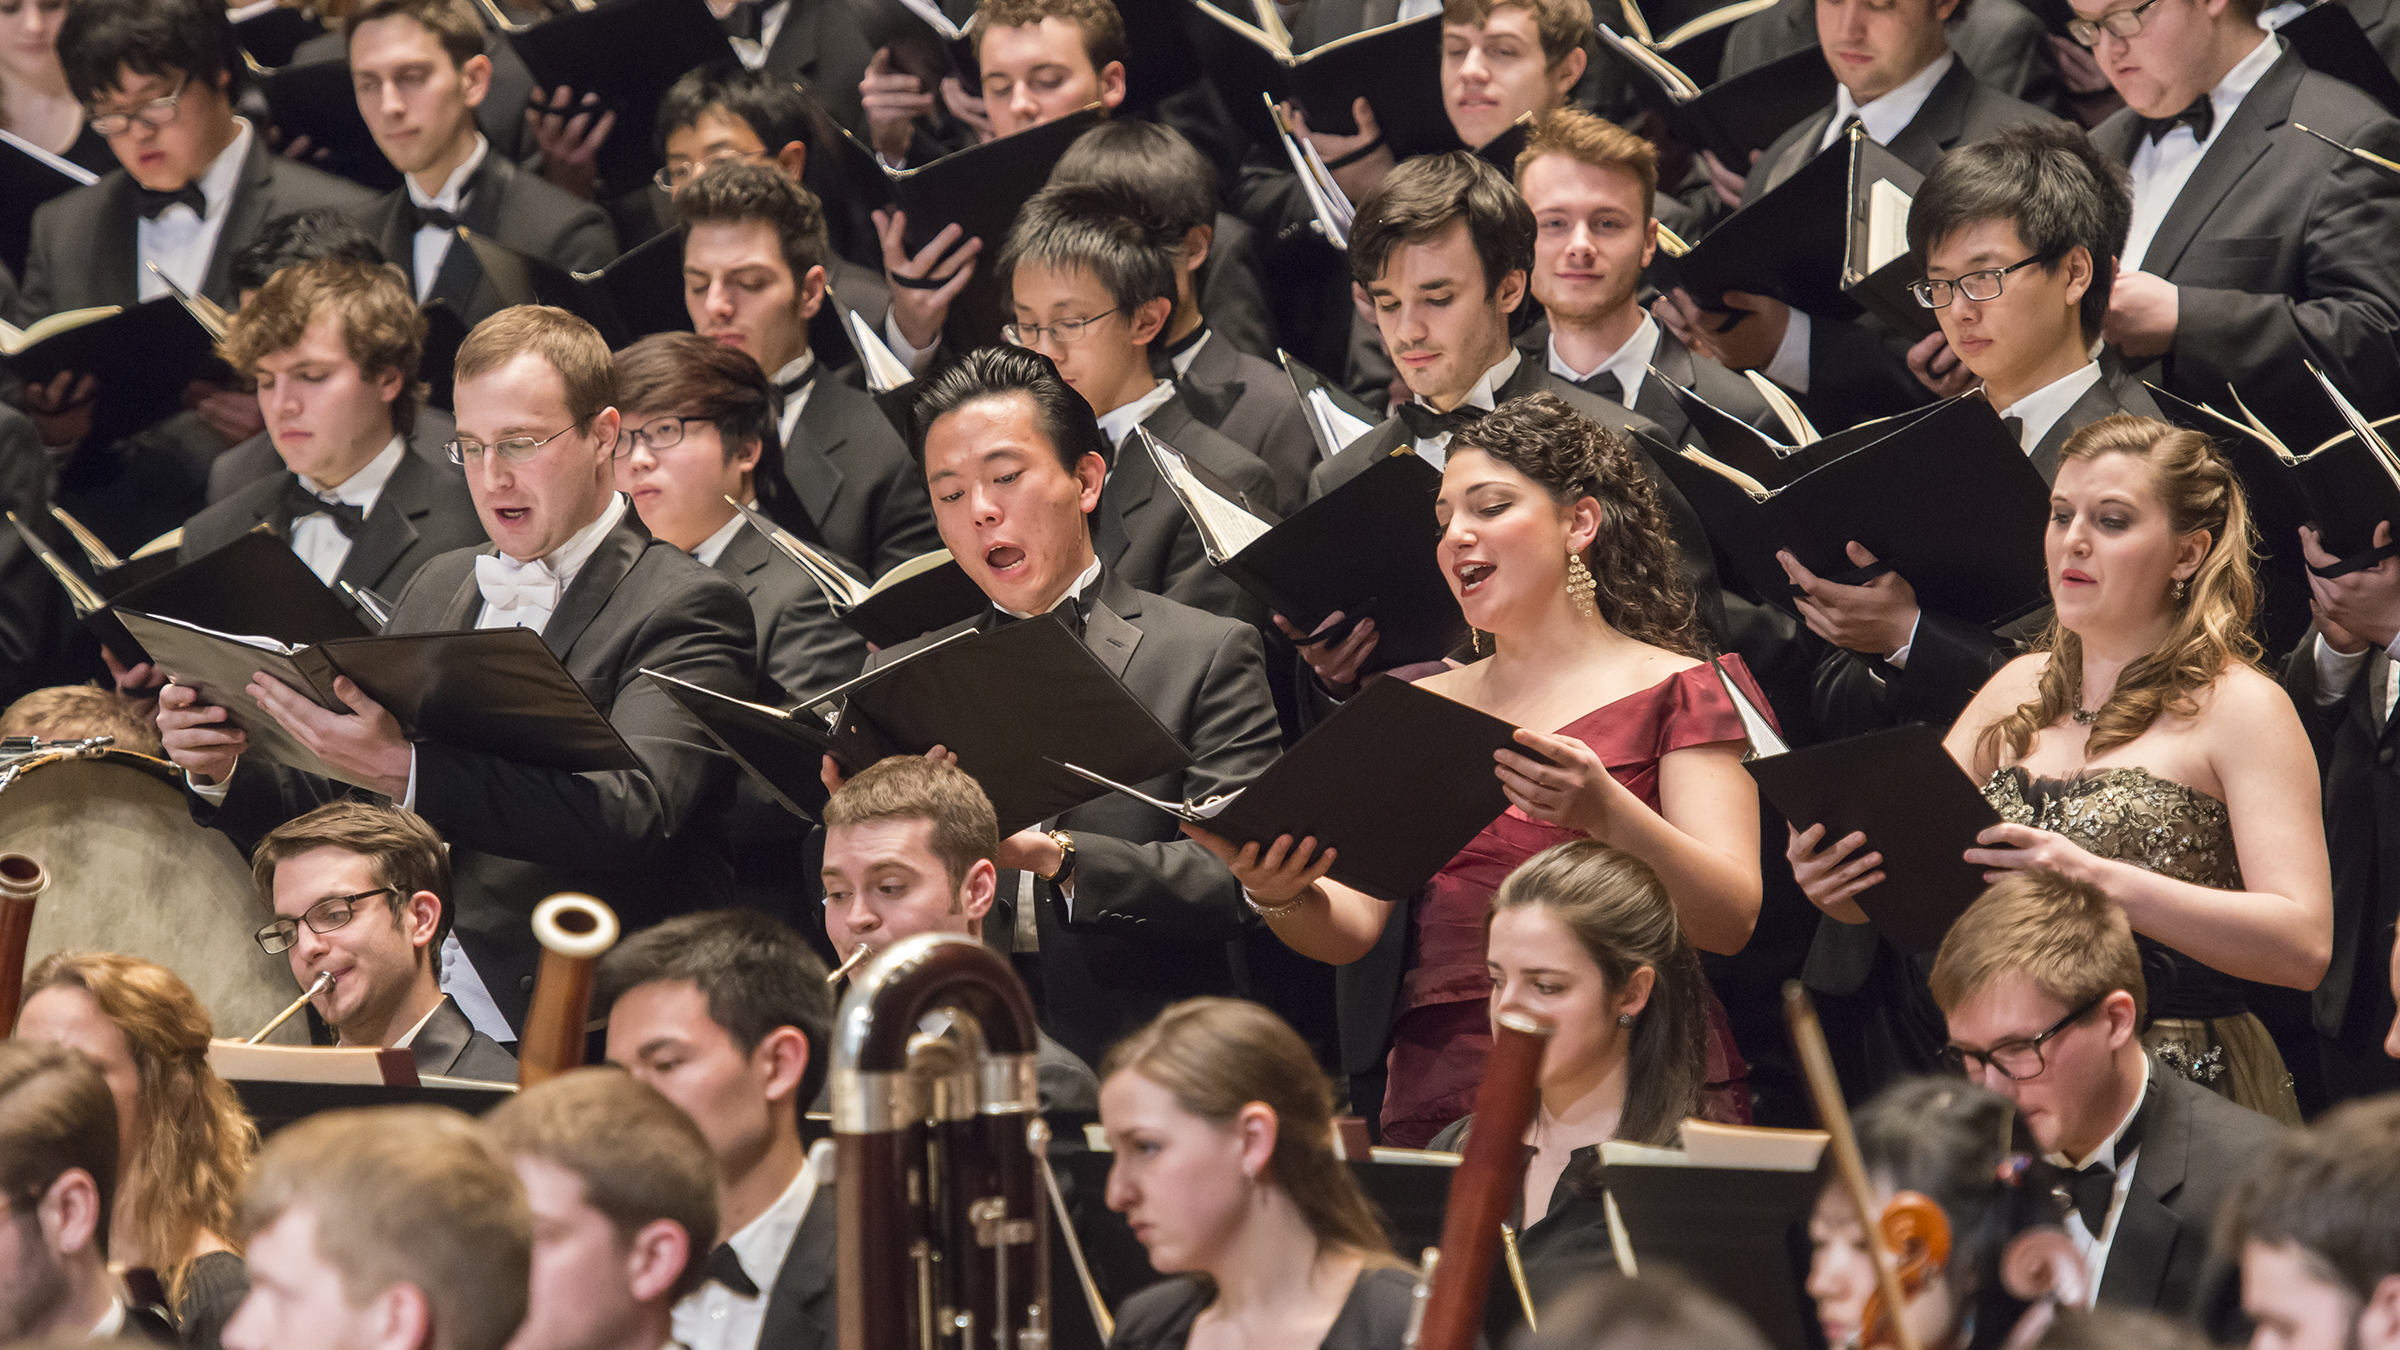 Soloists, chorus and orchestra perform Beethoven's Ninth